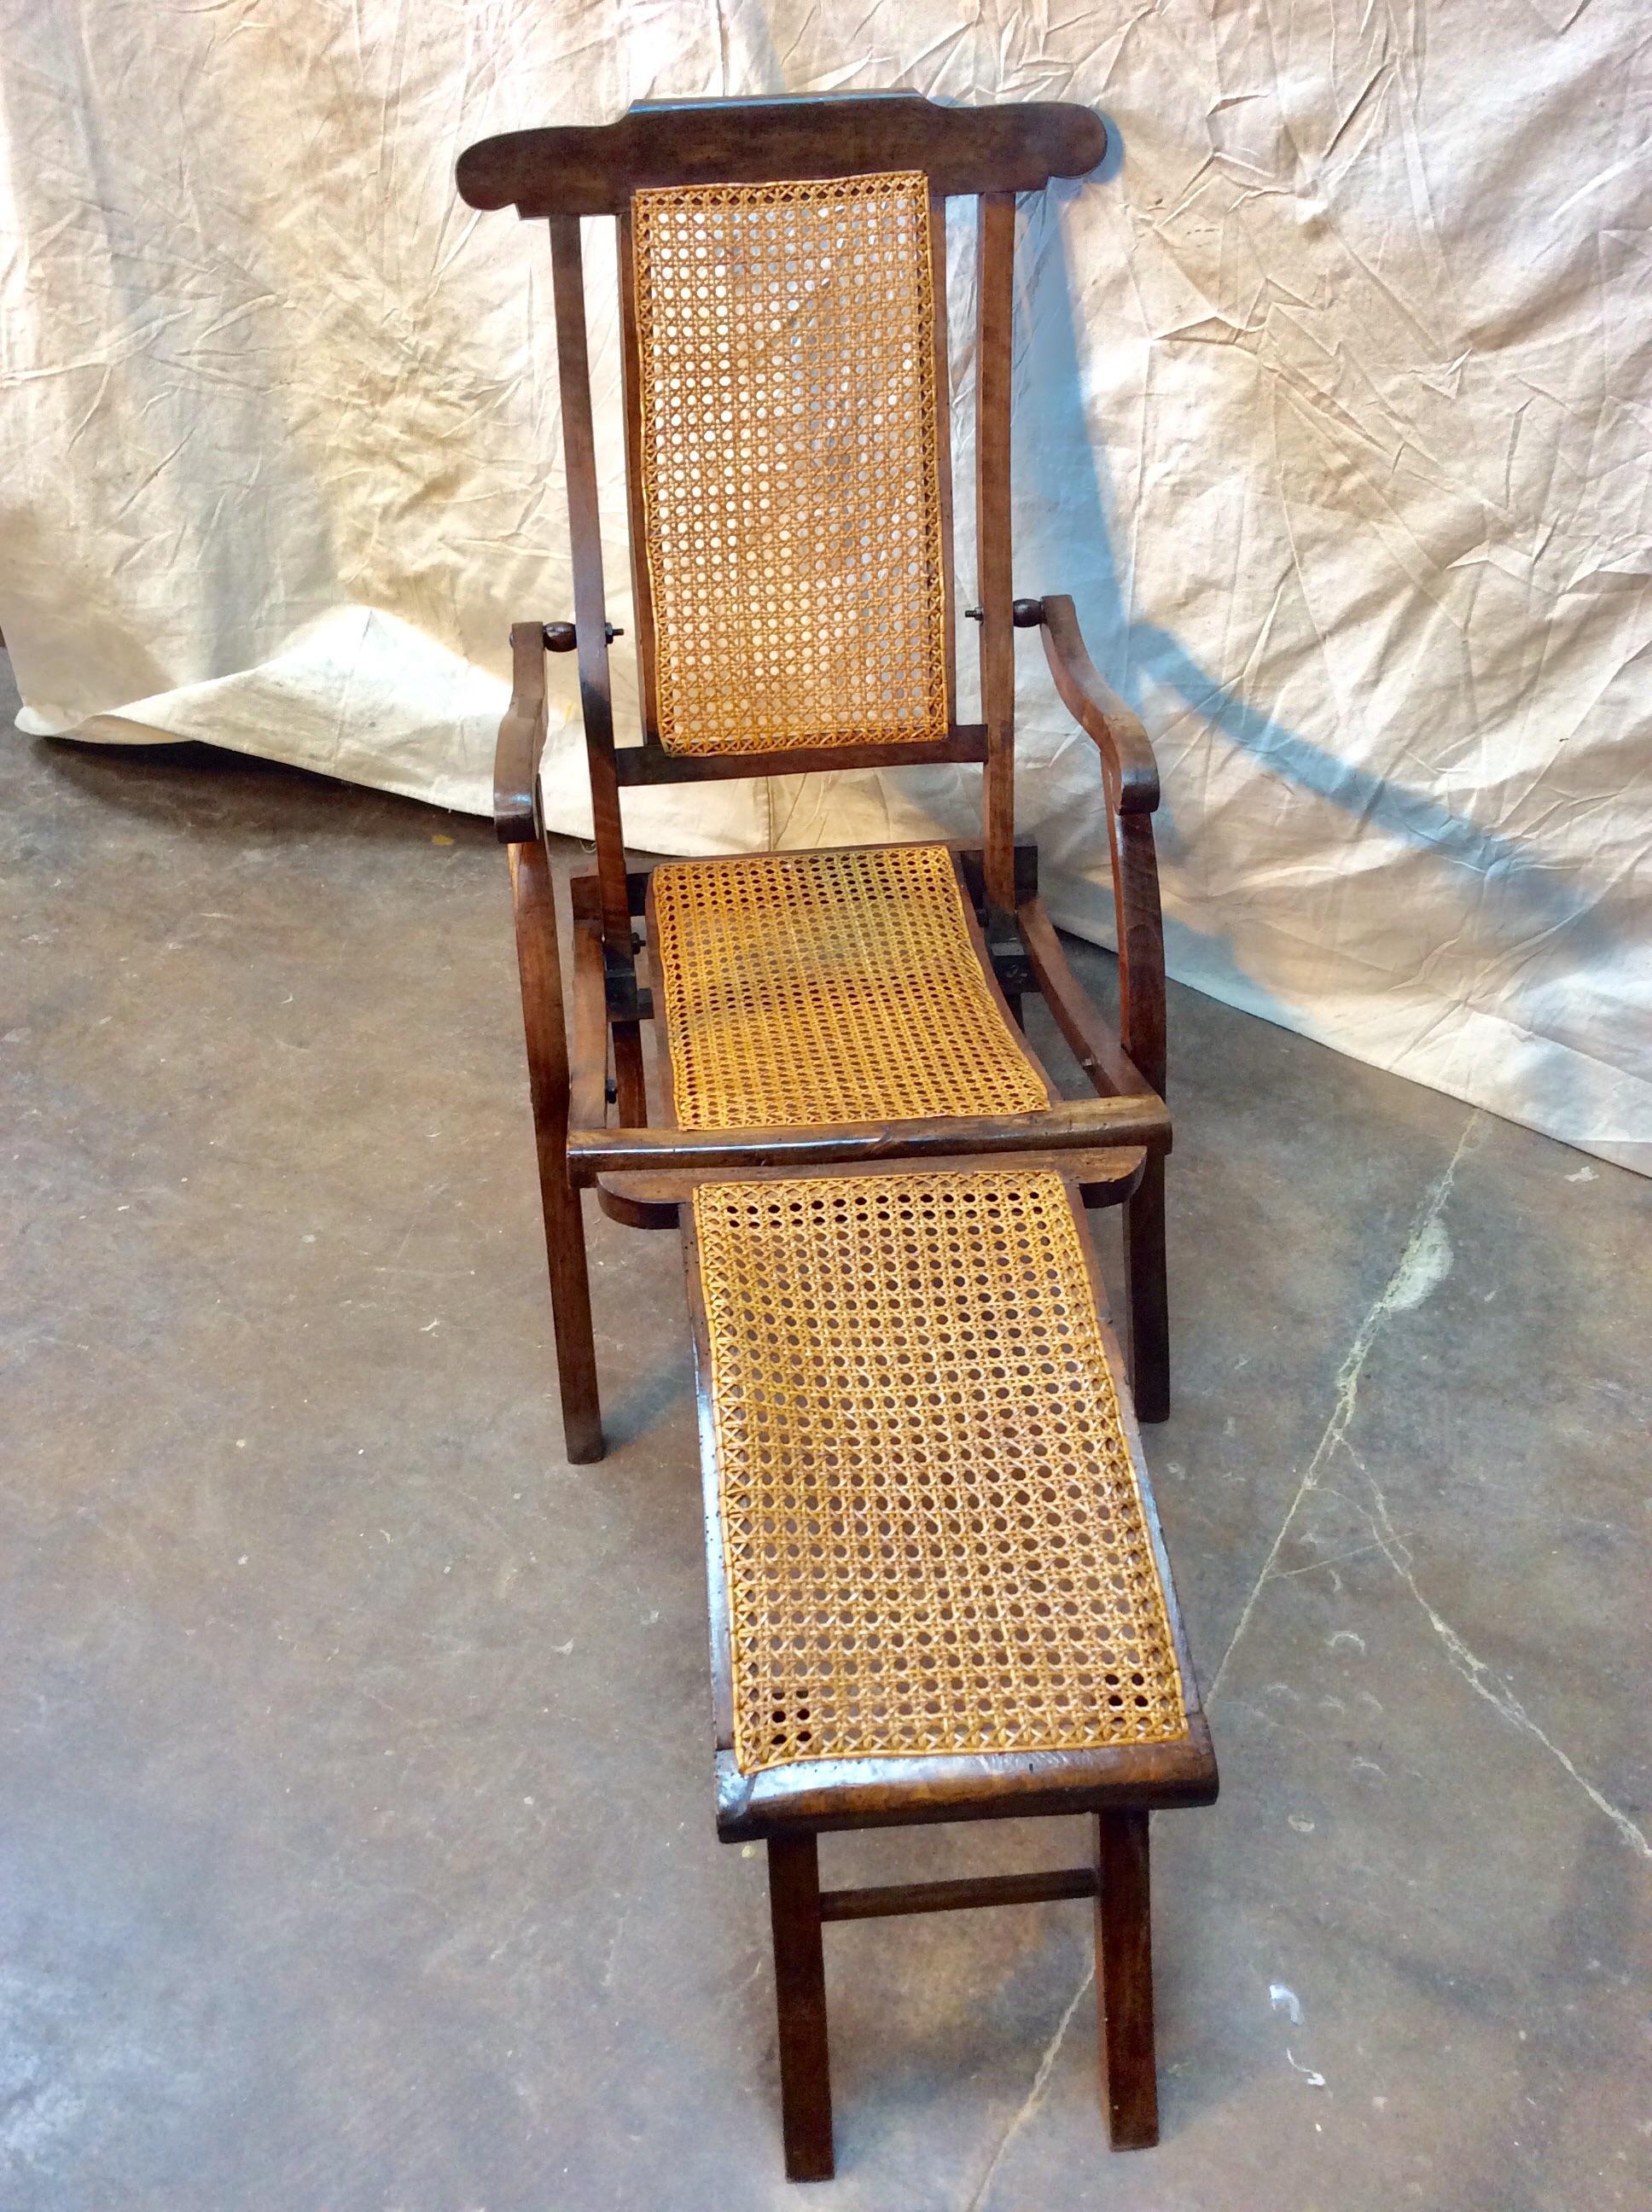 Found in the South of France, this stylish Early 1900s French Walnut and Cane Deck Chair was once used on steamer ships across Europe. The piece features a walnut frame with cane back and seat flanked by scrolling arms and splayed legs. Designed